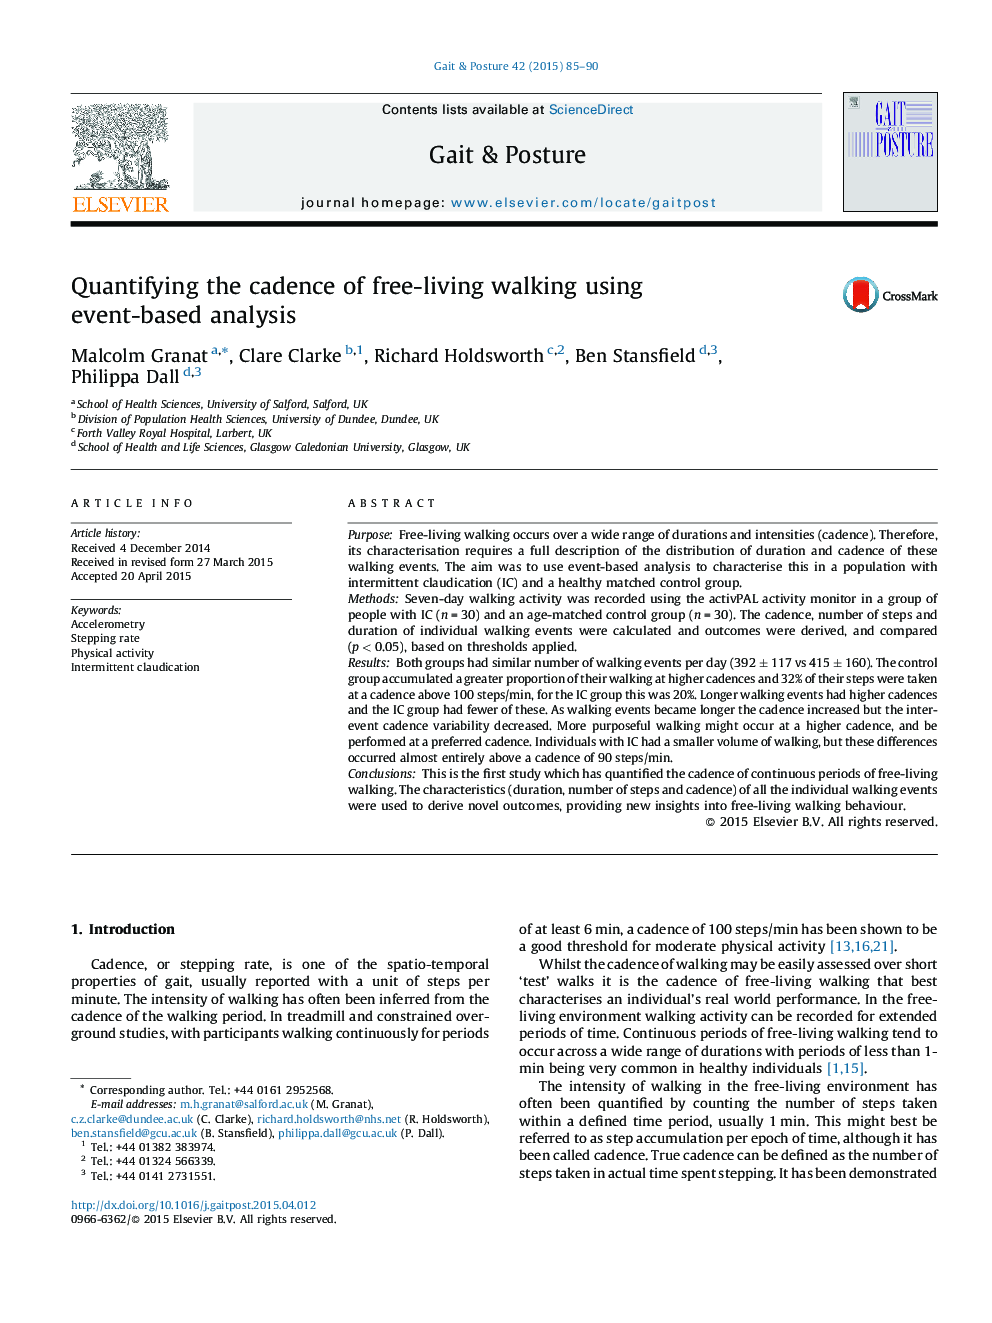 Quantifying the cadence of free-living walking using event-based analysis